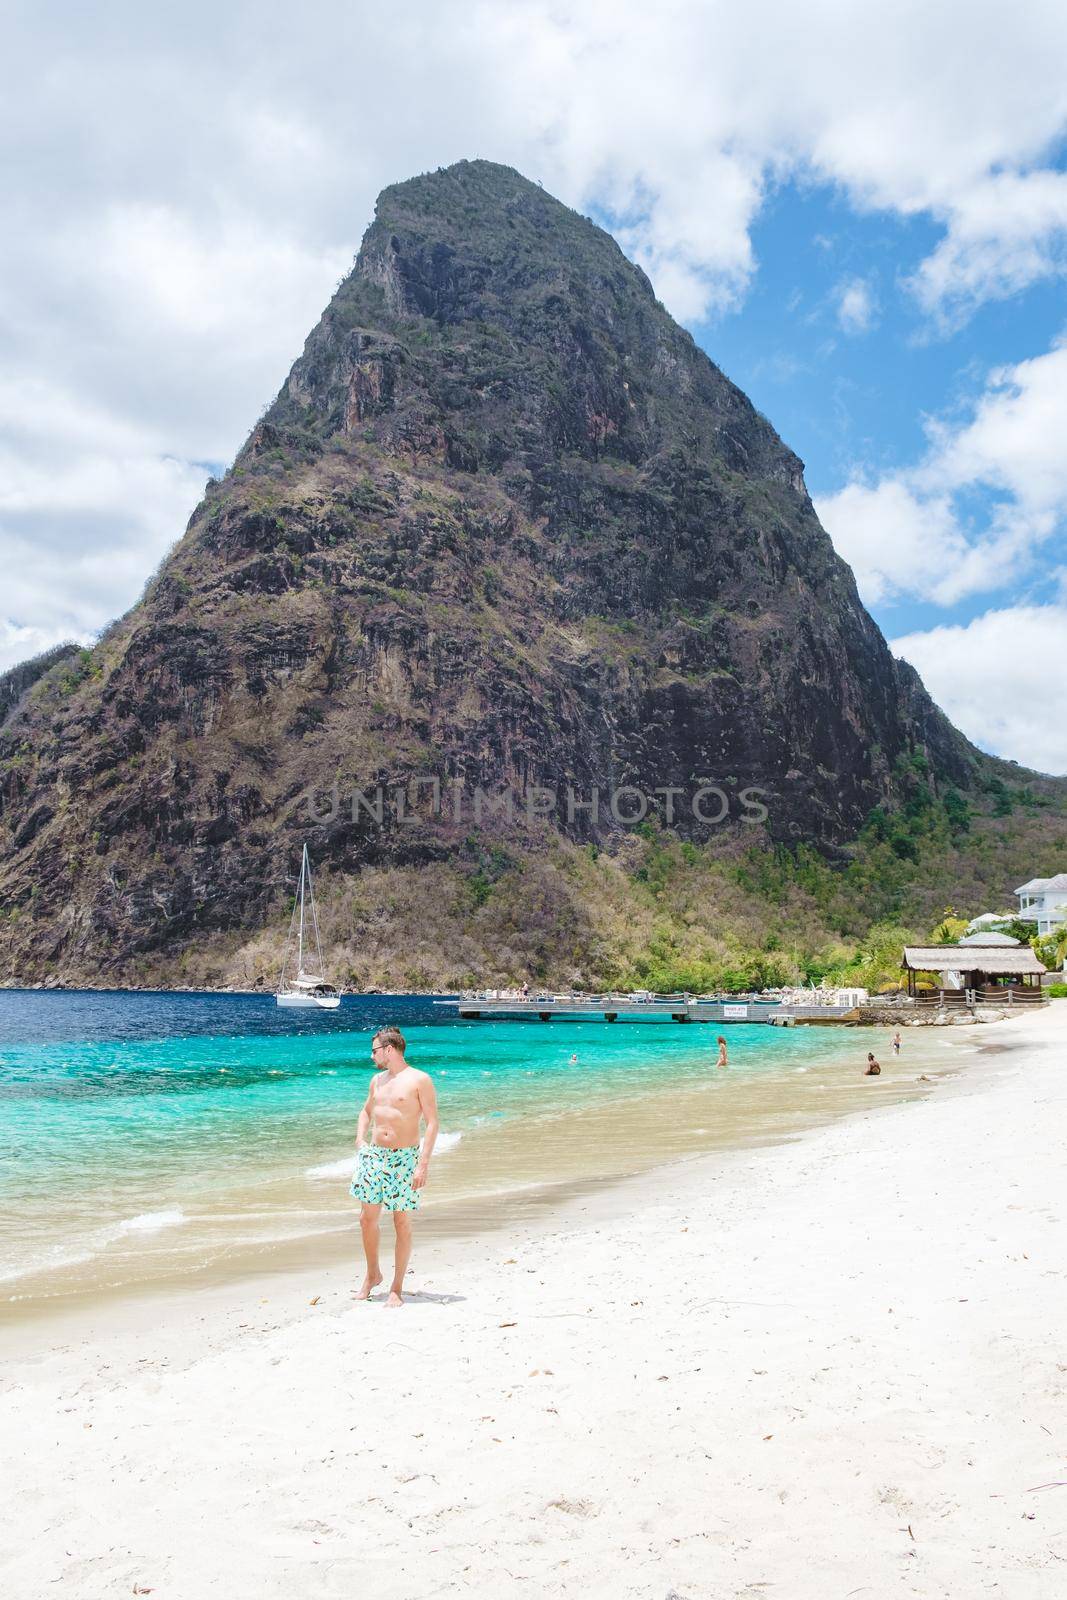 young men in a swim short on vacation in Saint Lucia, luxury holiday Saint Lucia Caribbean, men on vacation at the tropical Island of Saint Lucia Caribbean. Calabash beach St Lucia Caribbean